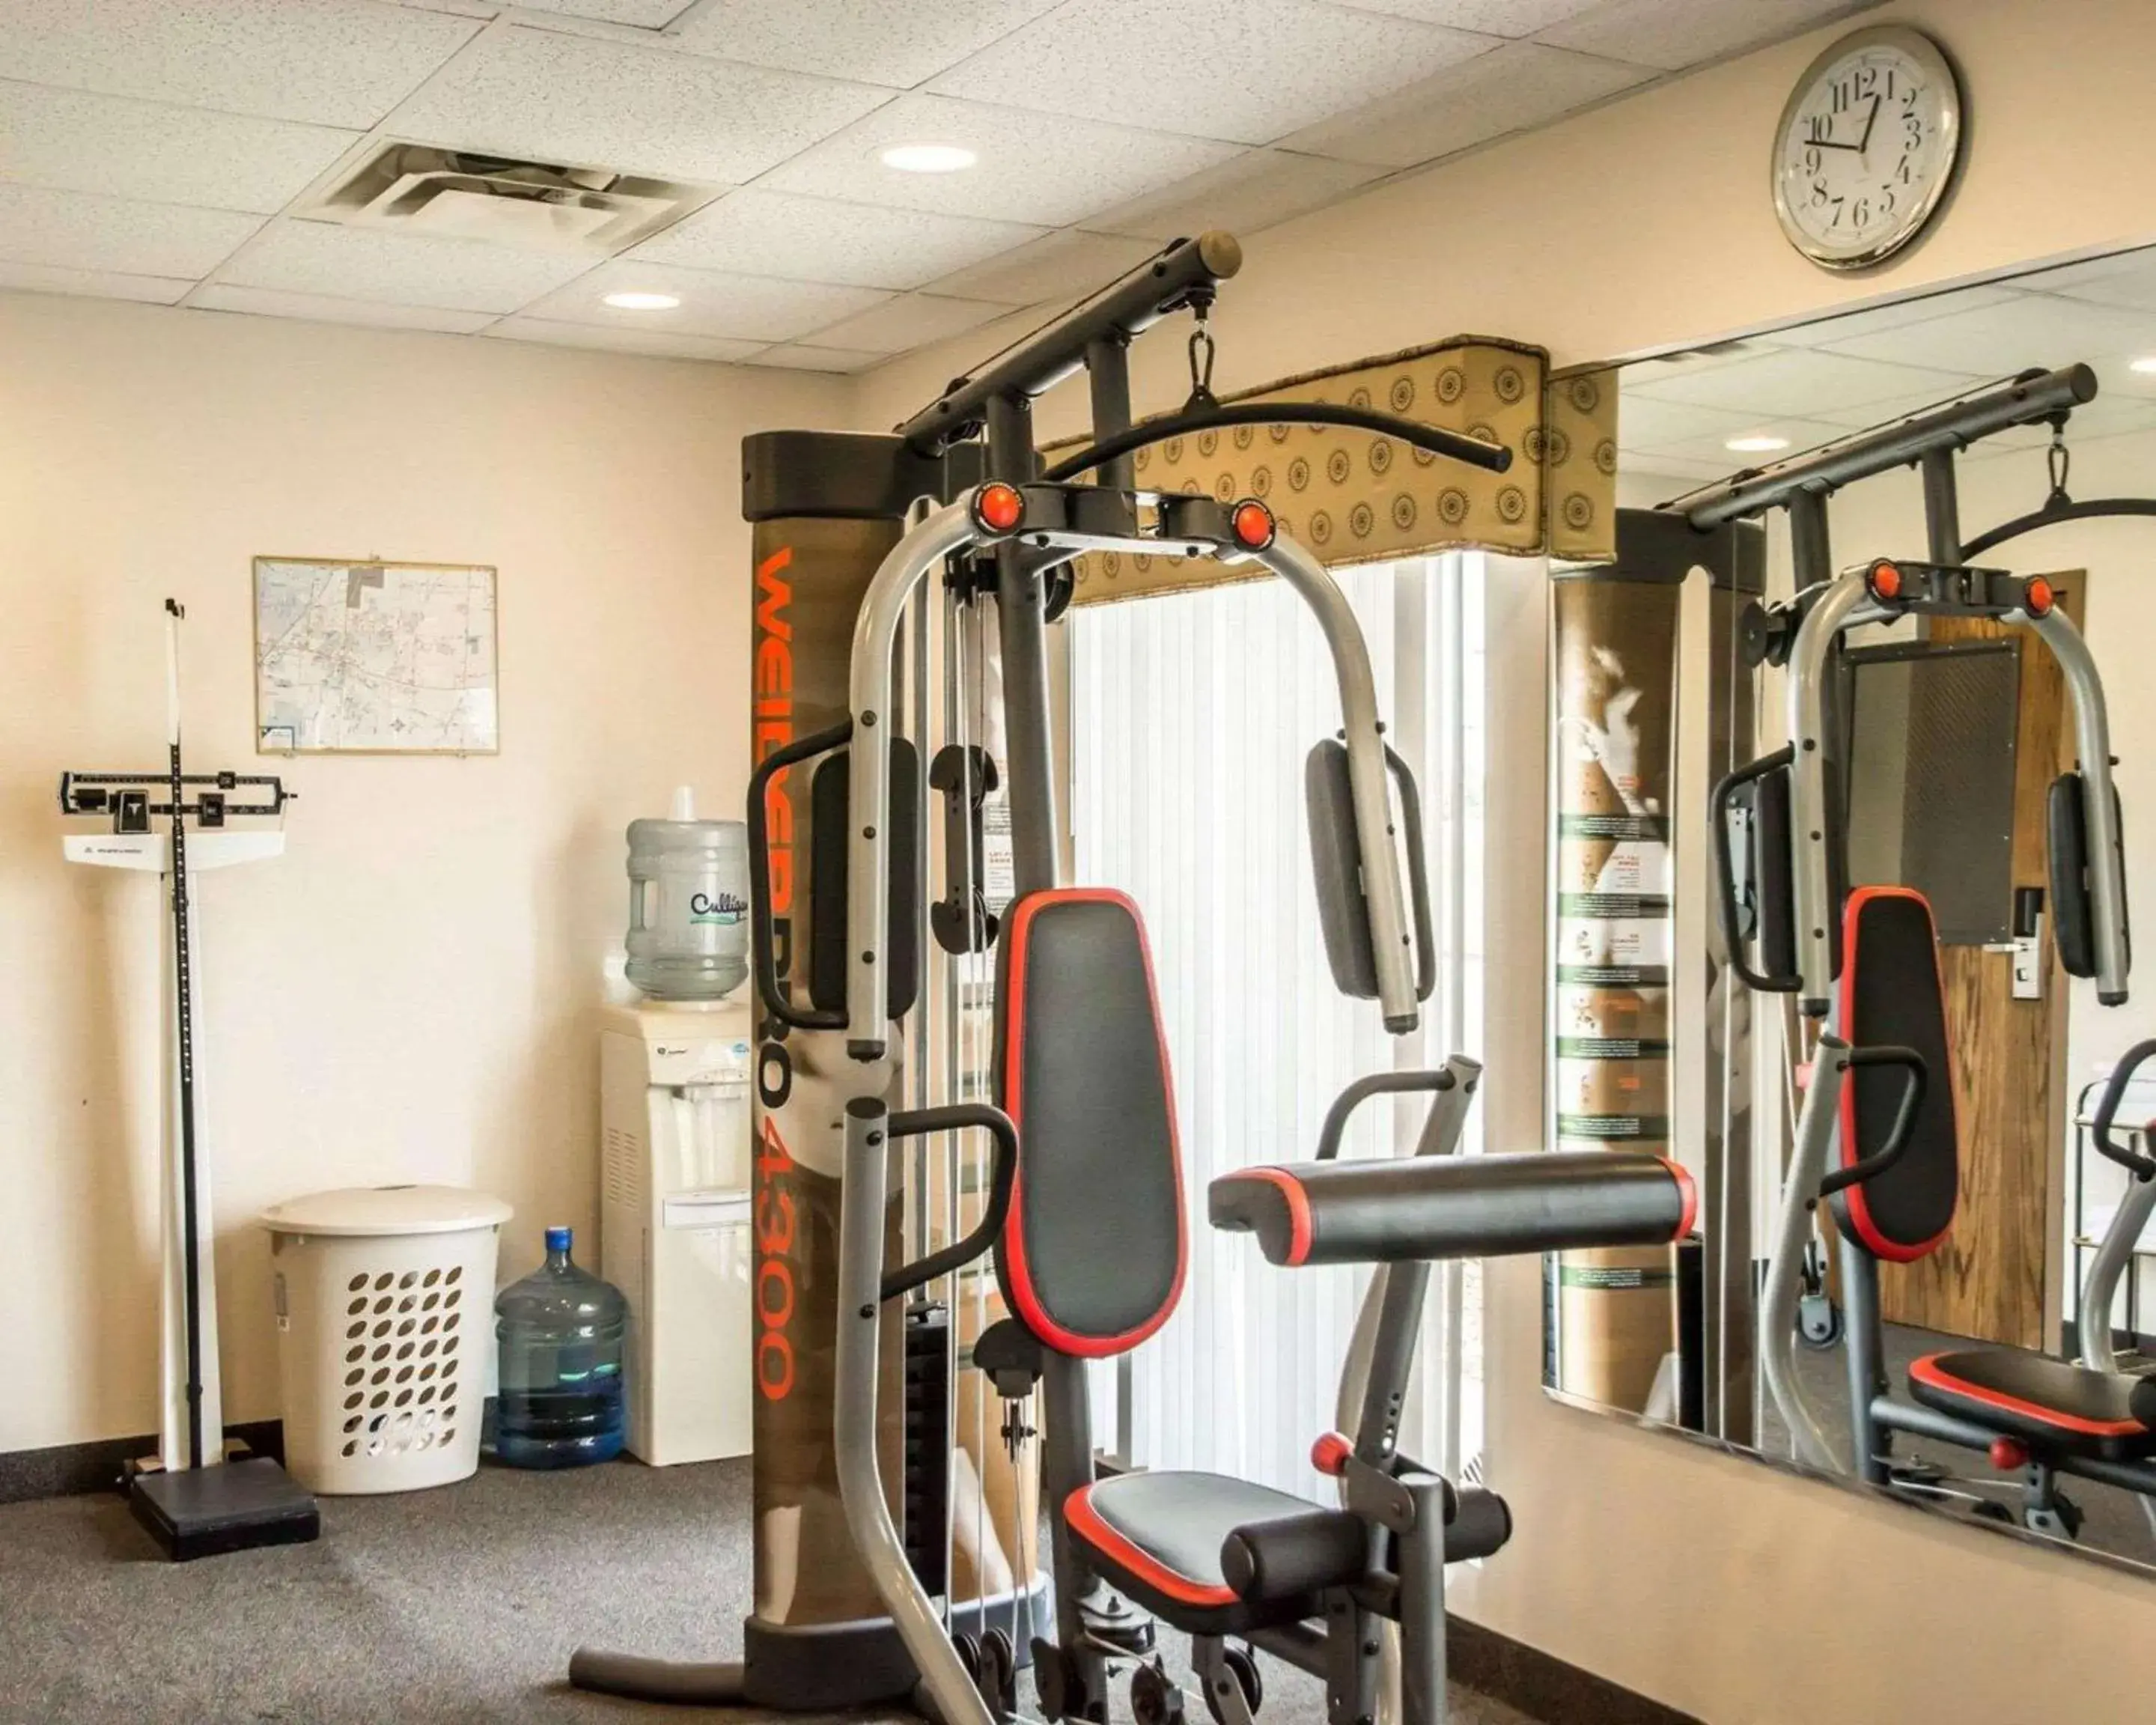 Fitness centre/facilities, Fitness Center/Facilities in Quality Inn Springboro West